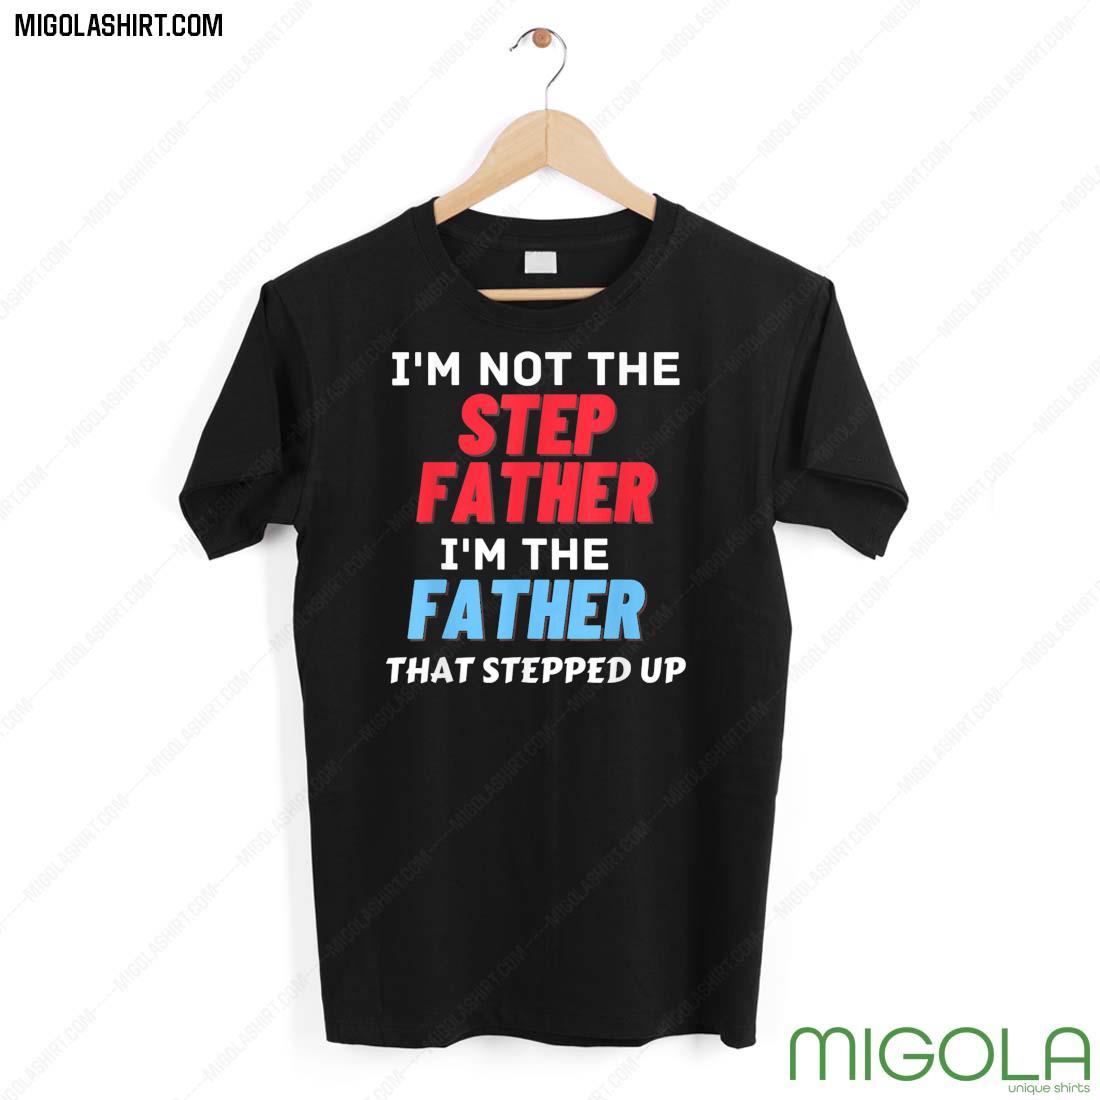 I’m Not The Step Father Stepped Up For Father’s Day 2022 Shirt